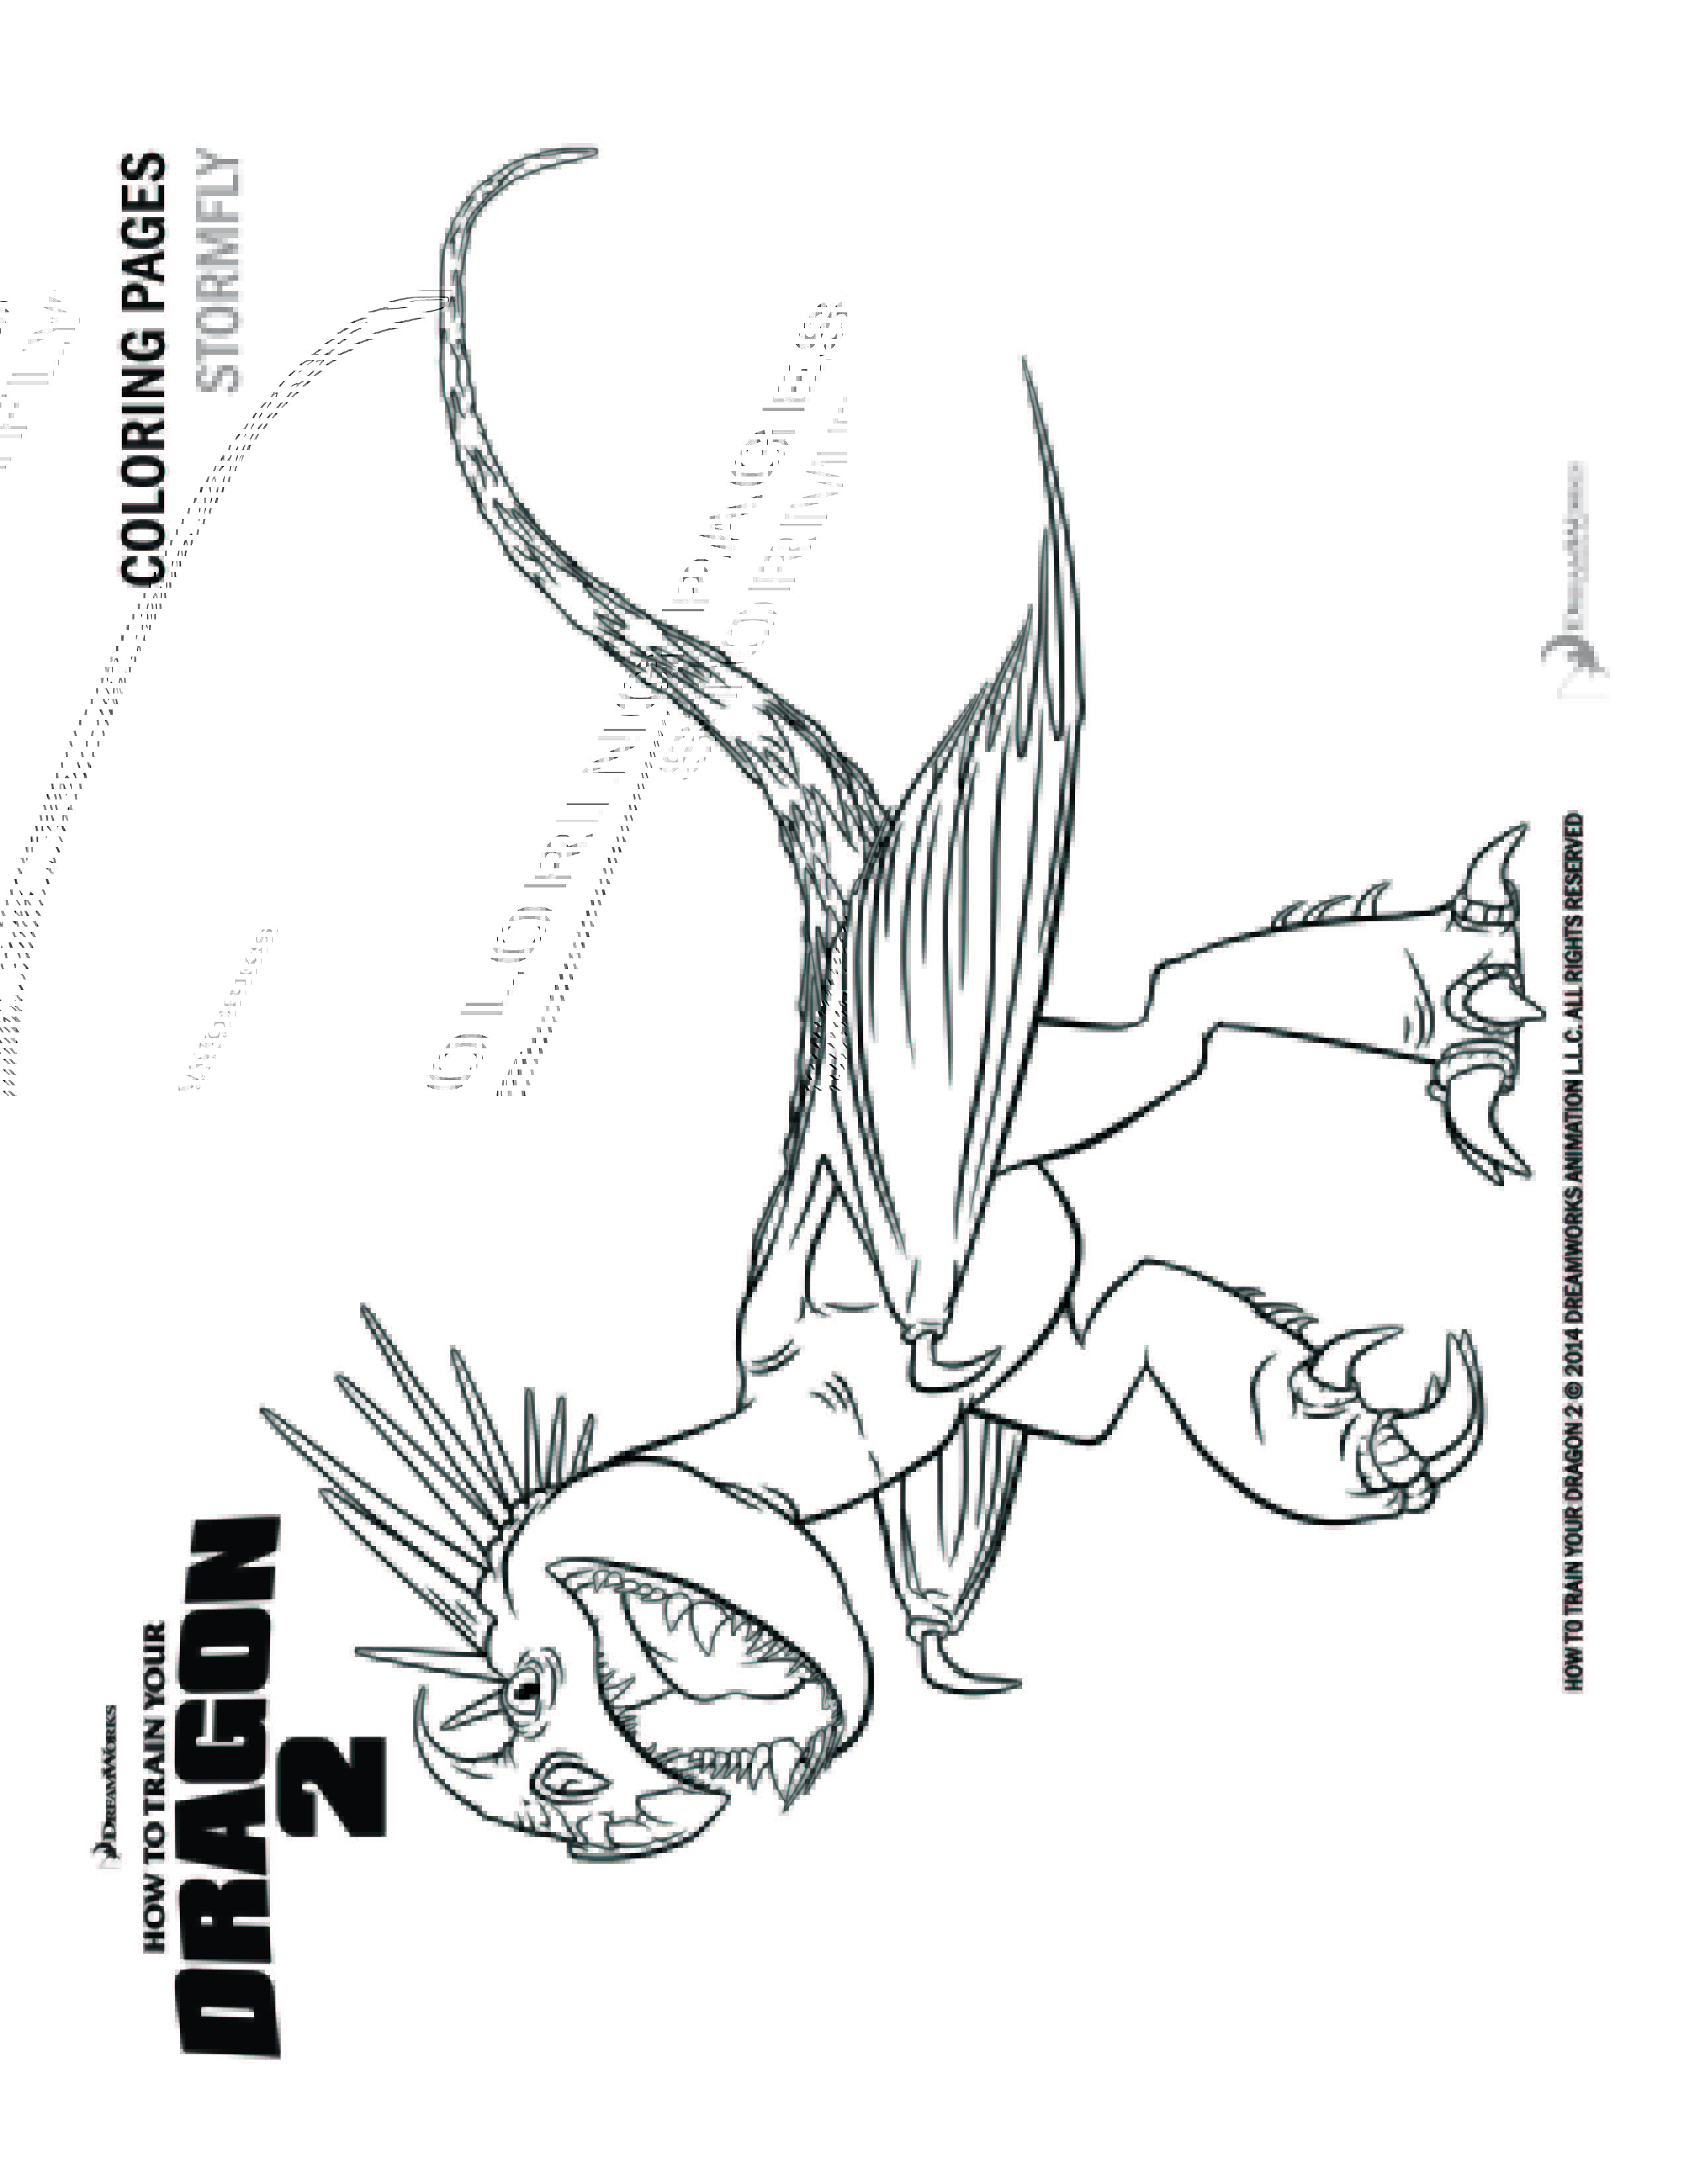 How to train your dragon coloring pages and activity sheets